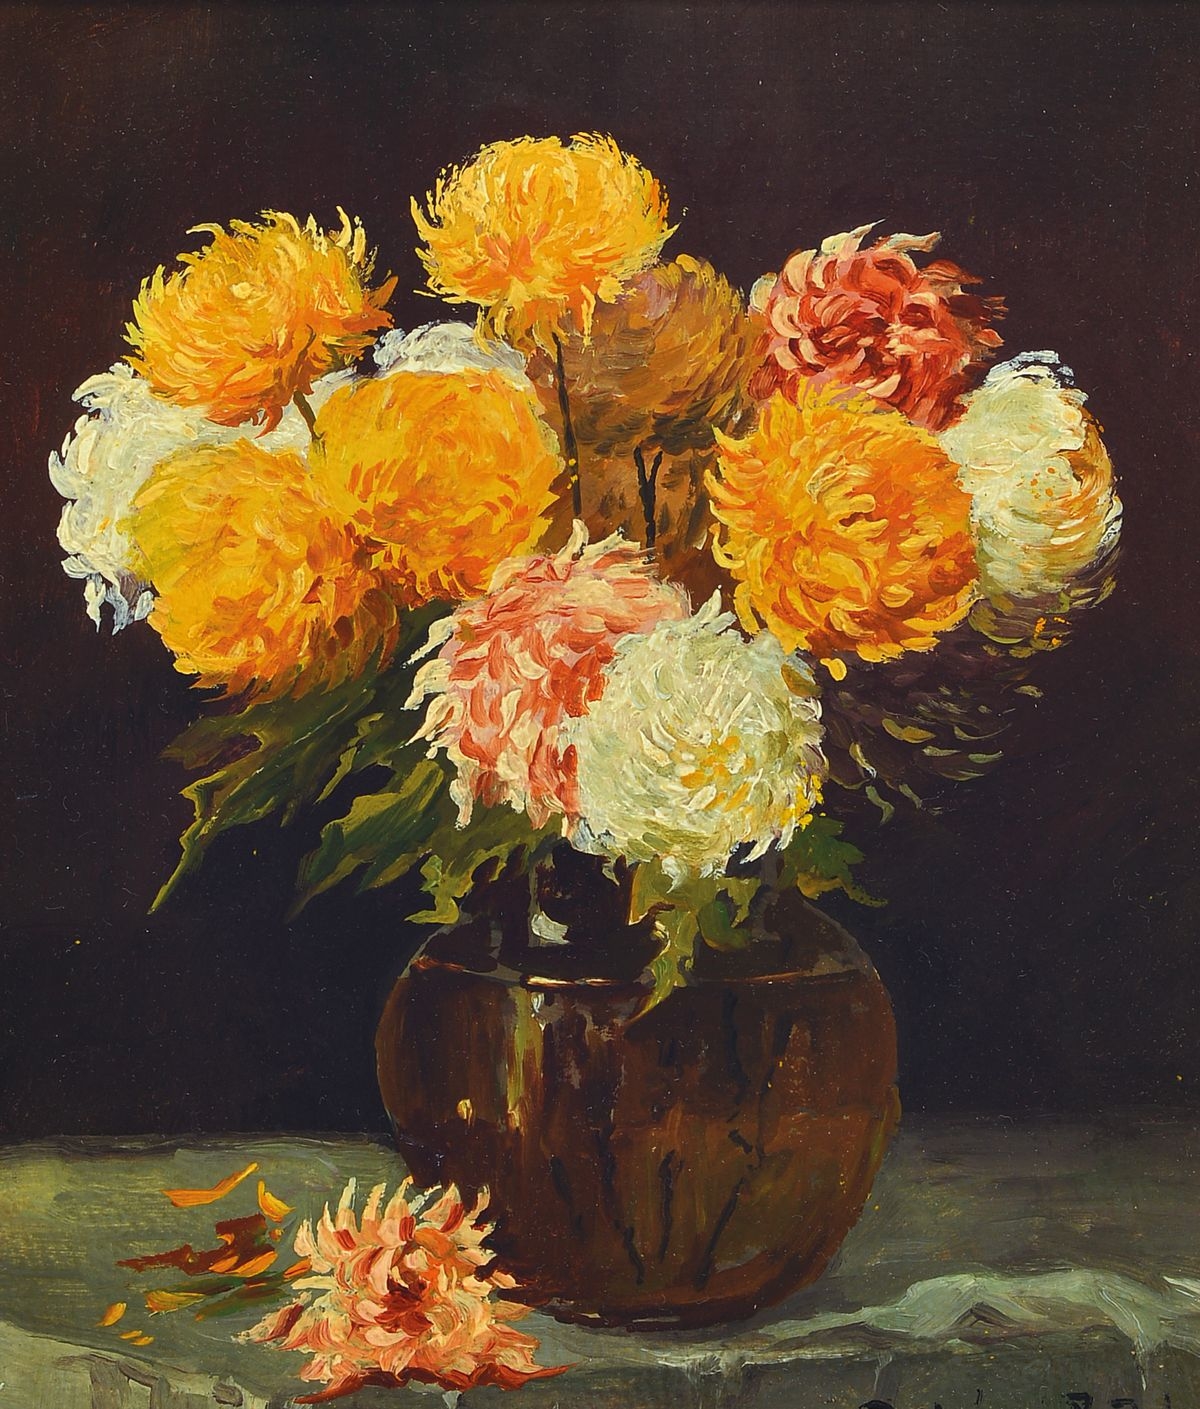 Spring Flowers In A Crystal Vase by Endre Balogh